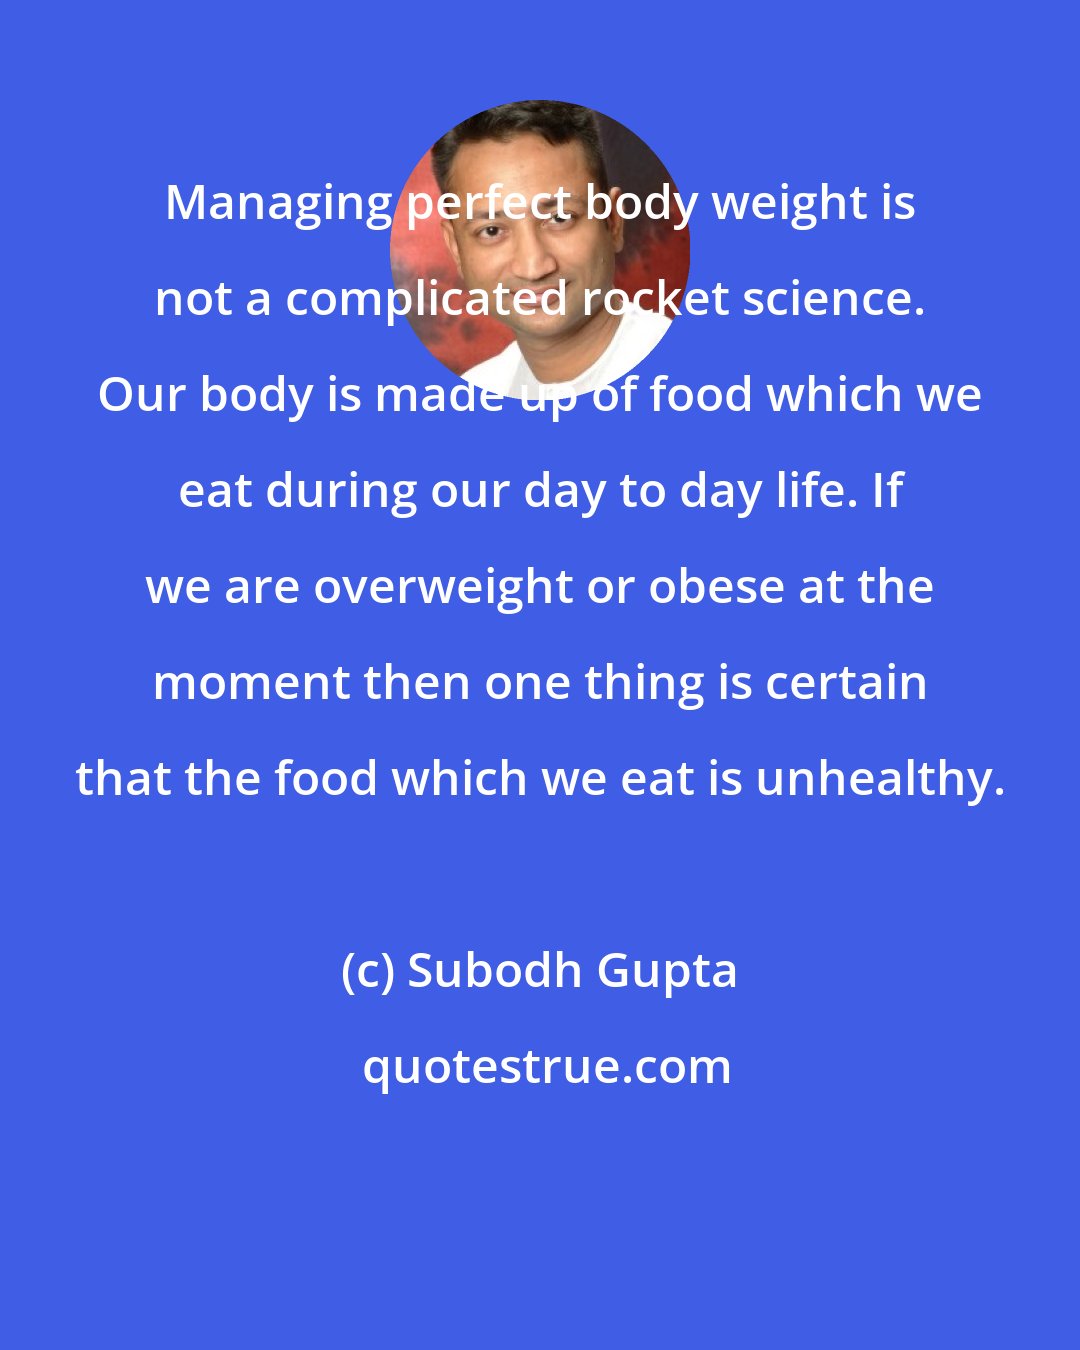 Subodh Gupta: Managing perfect body weight is not a complicated rocket science. Our body is made up of food which we eat during our day to day life. If we are overweight or obese at the moment then one thing is certain that the food which we eat is unhealthy.